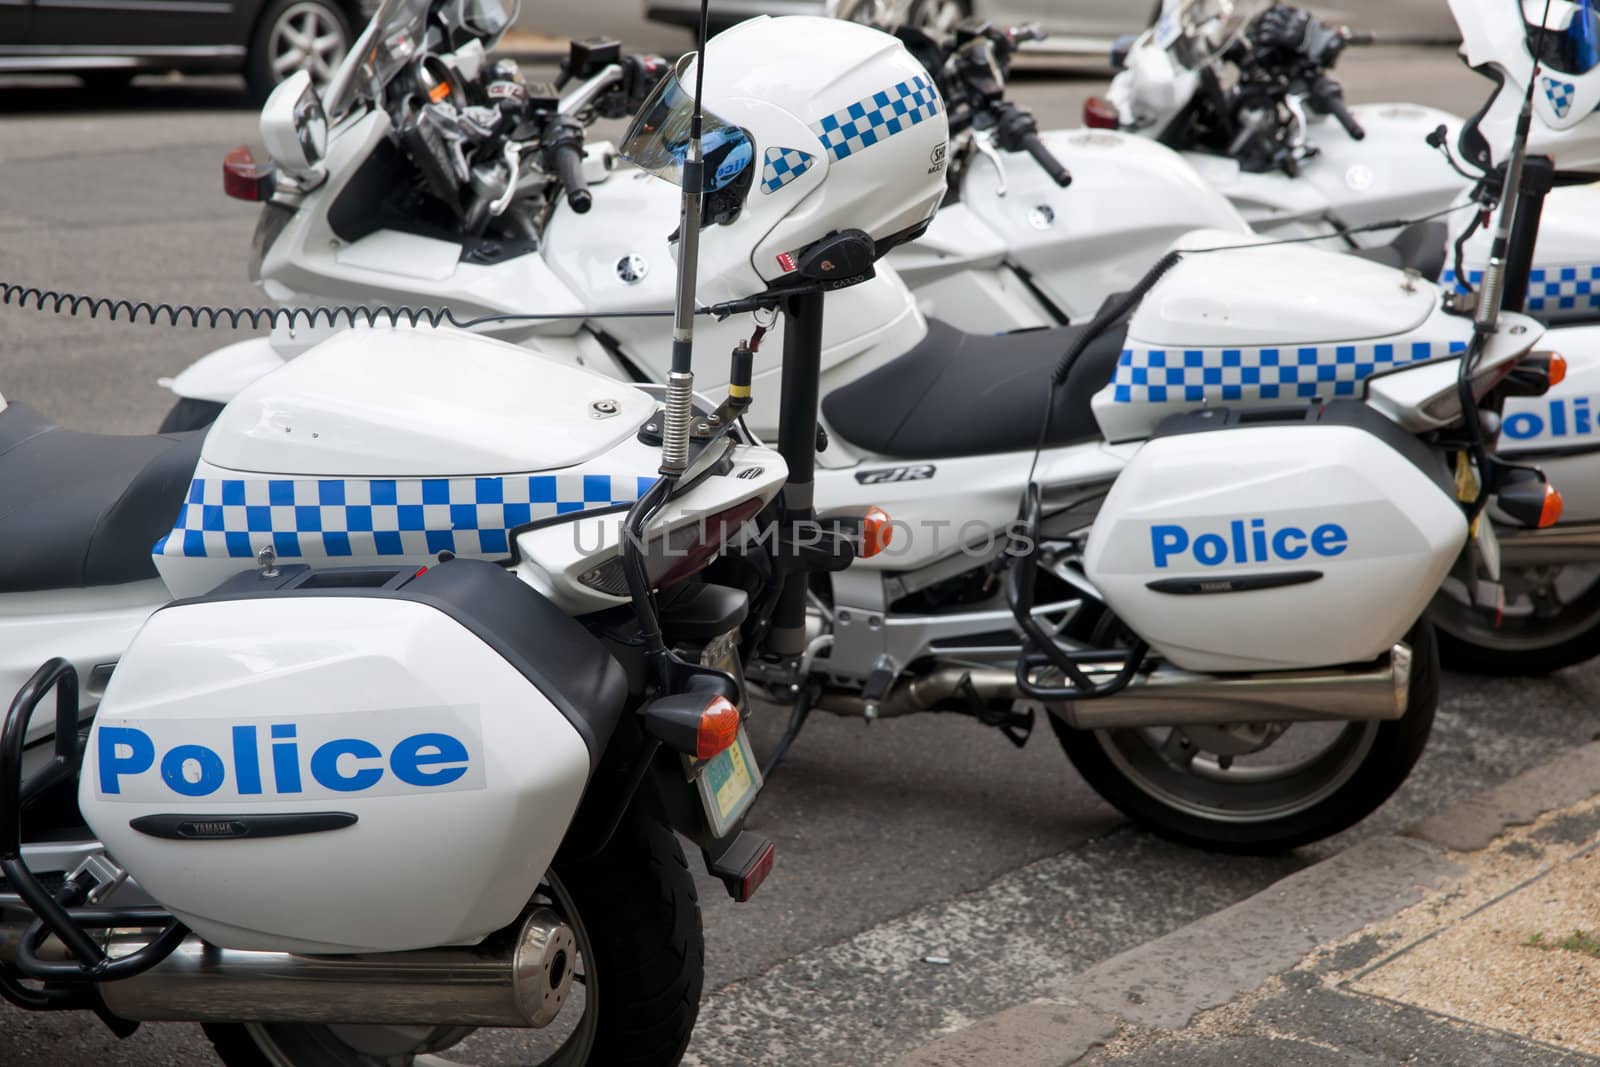 Police motorcycles. by brians101